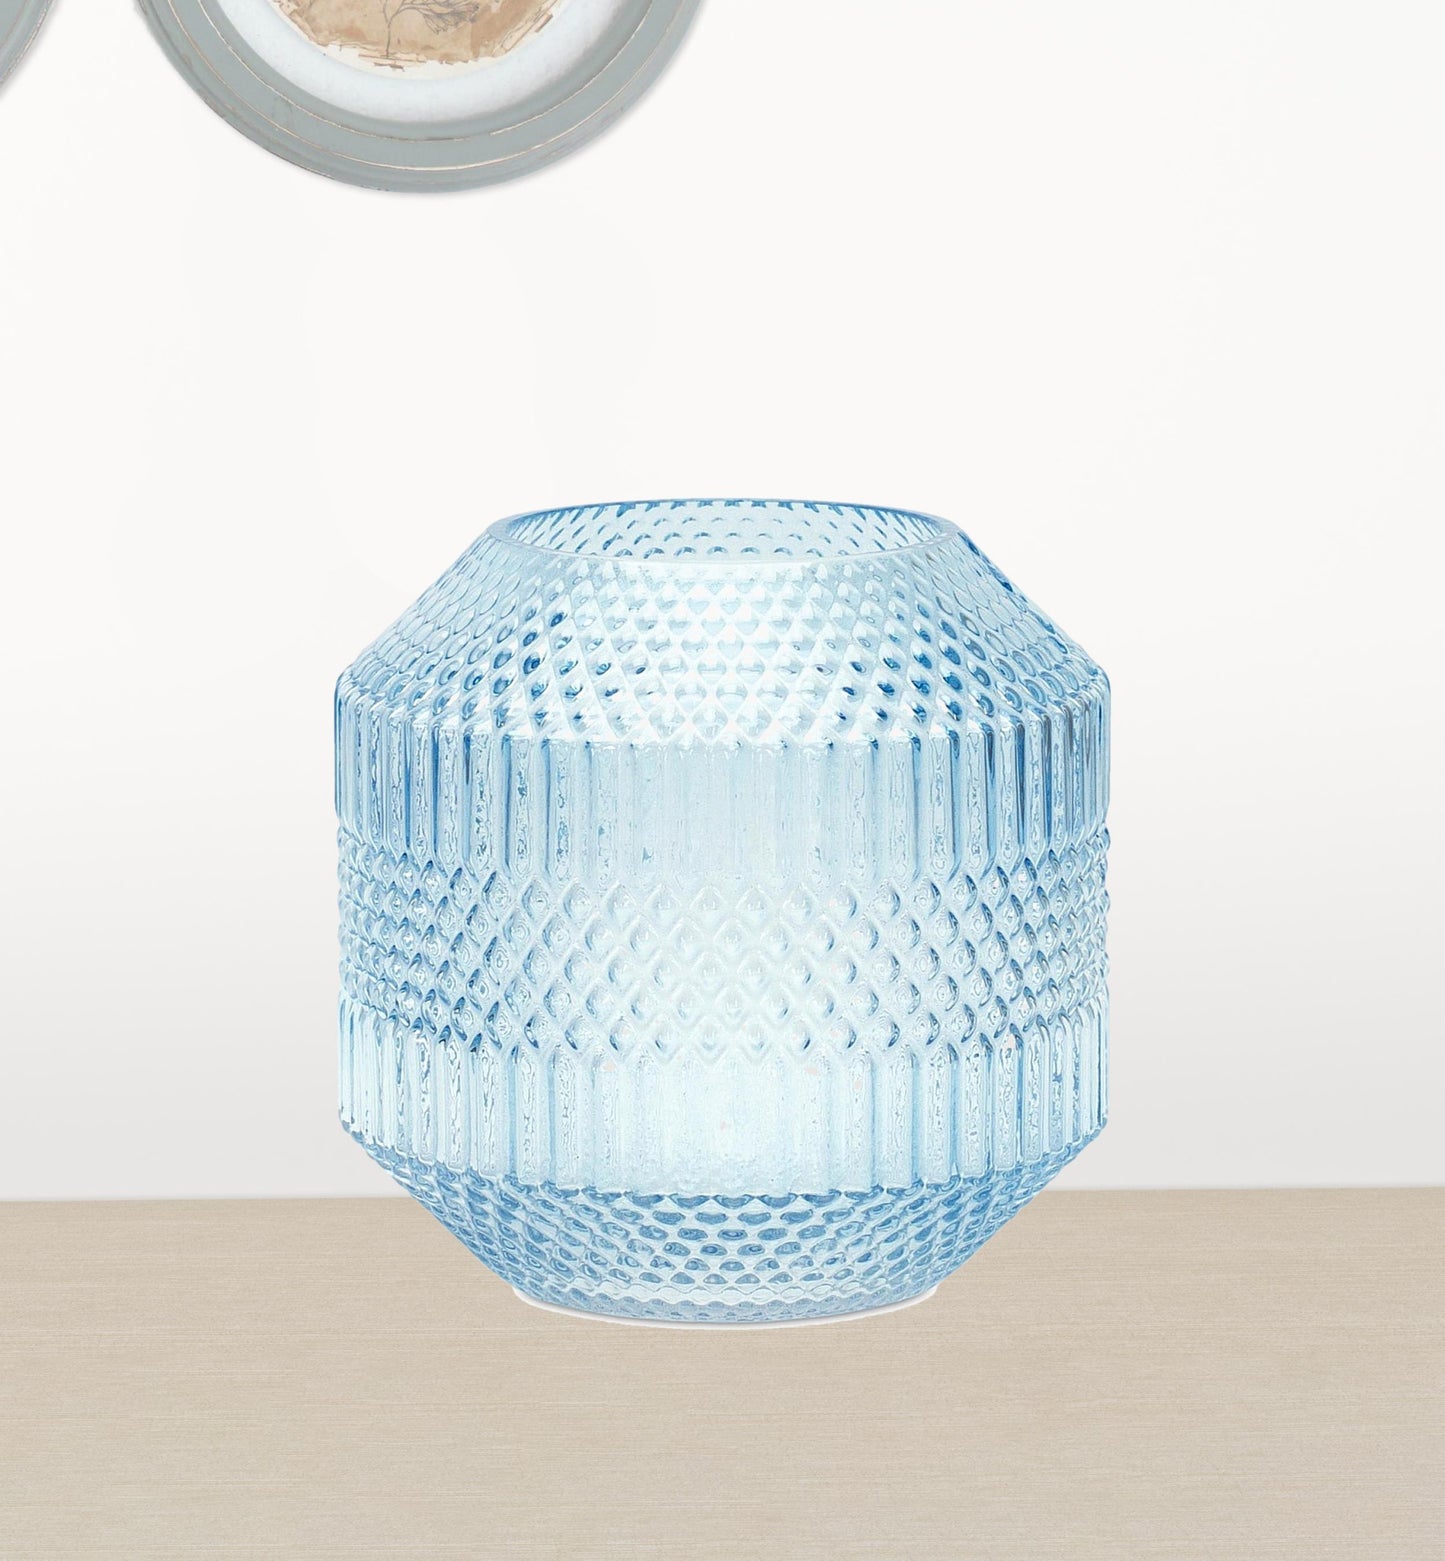 8" Crystal Glass Blue Round Table vase